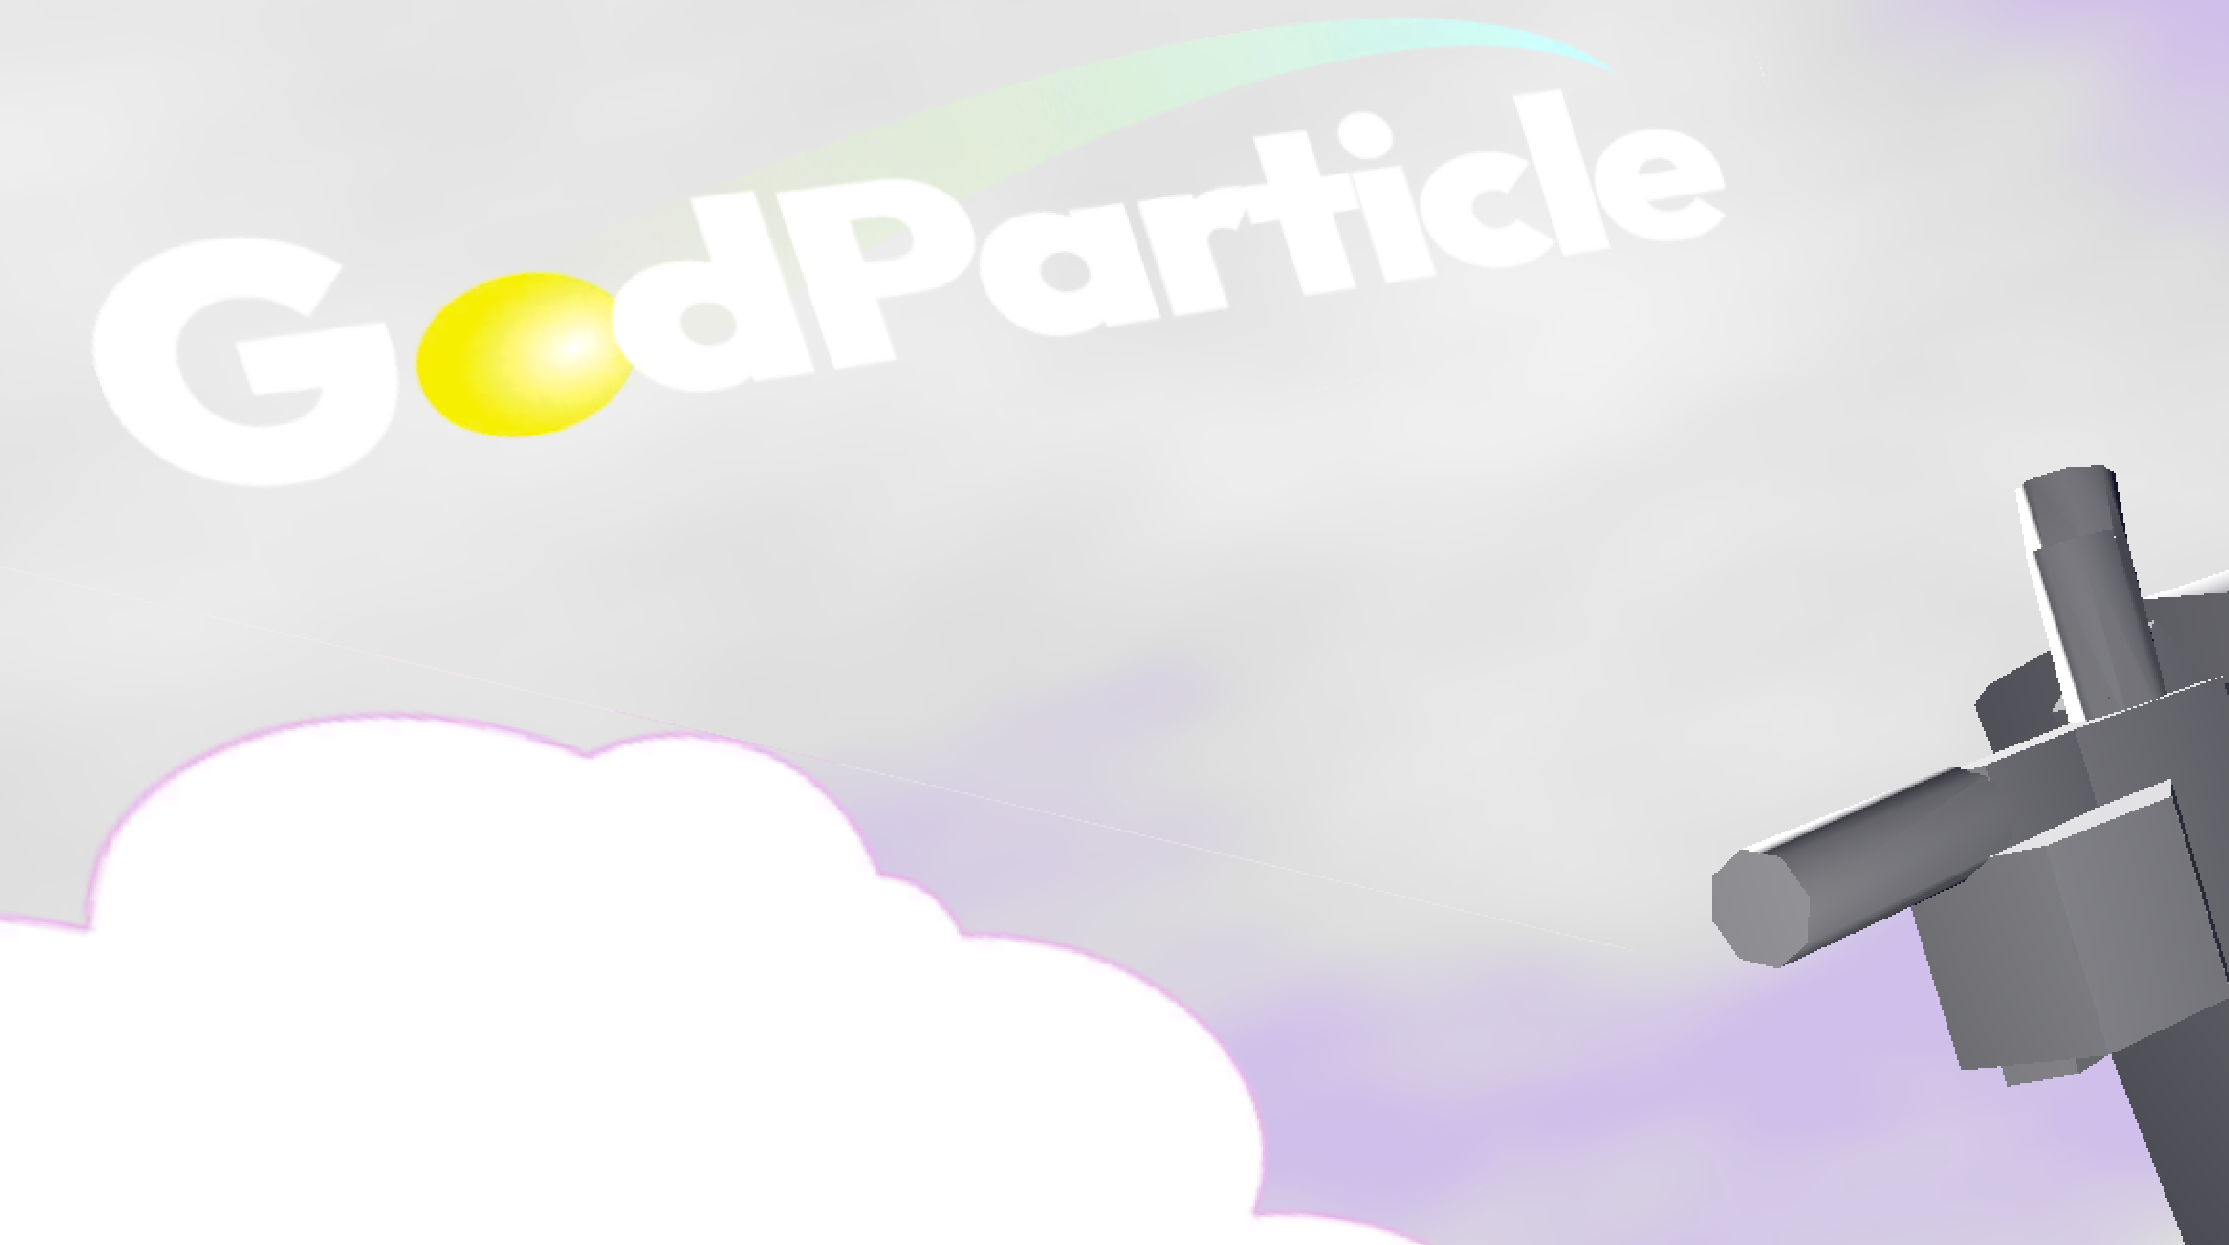 GodParticle